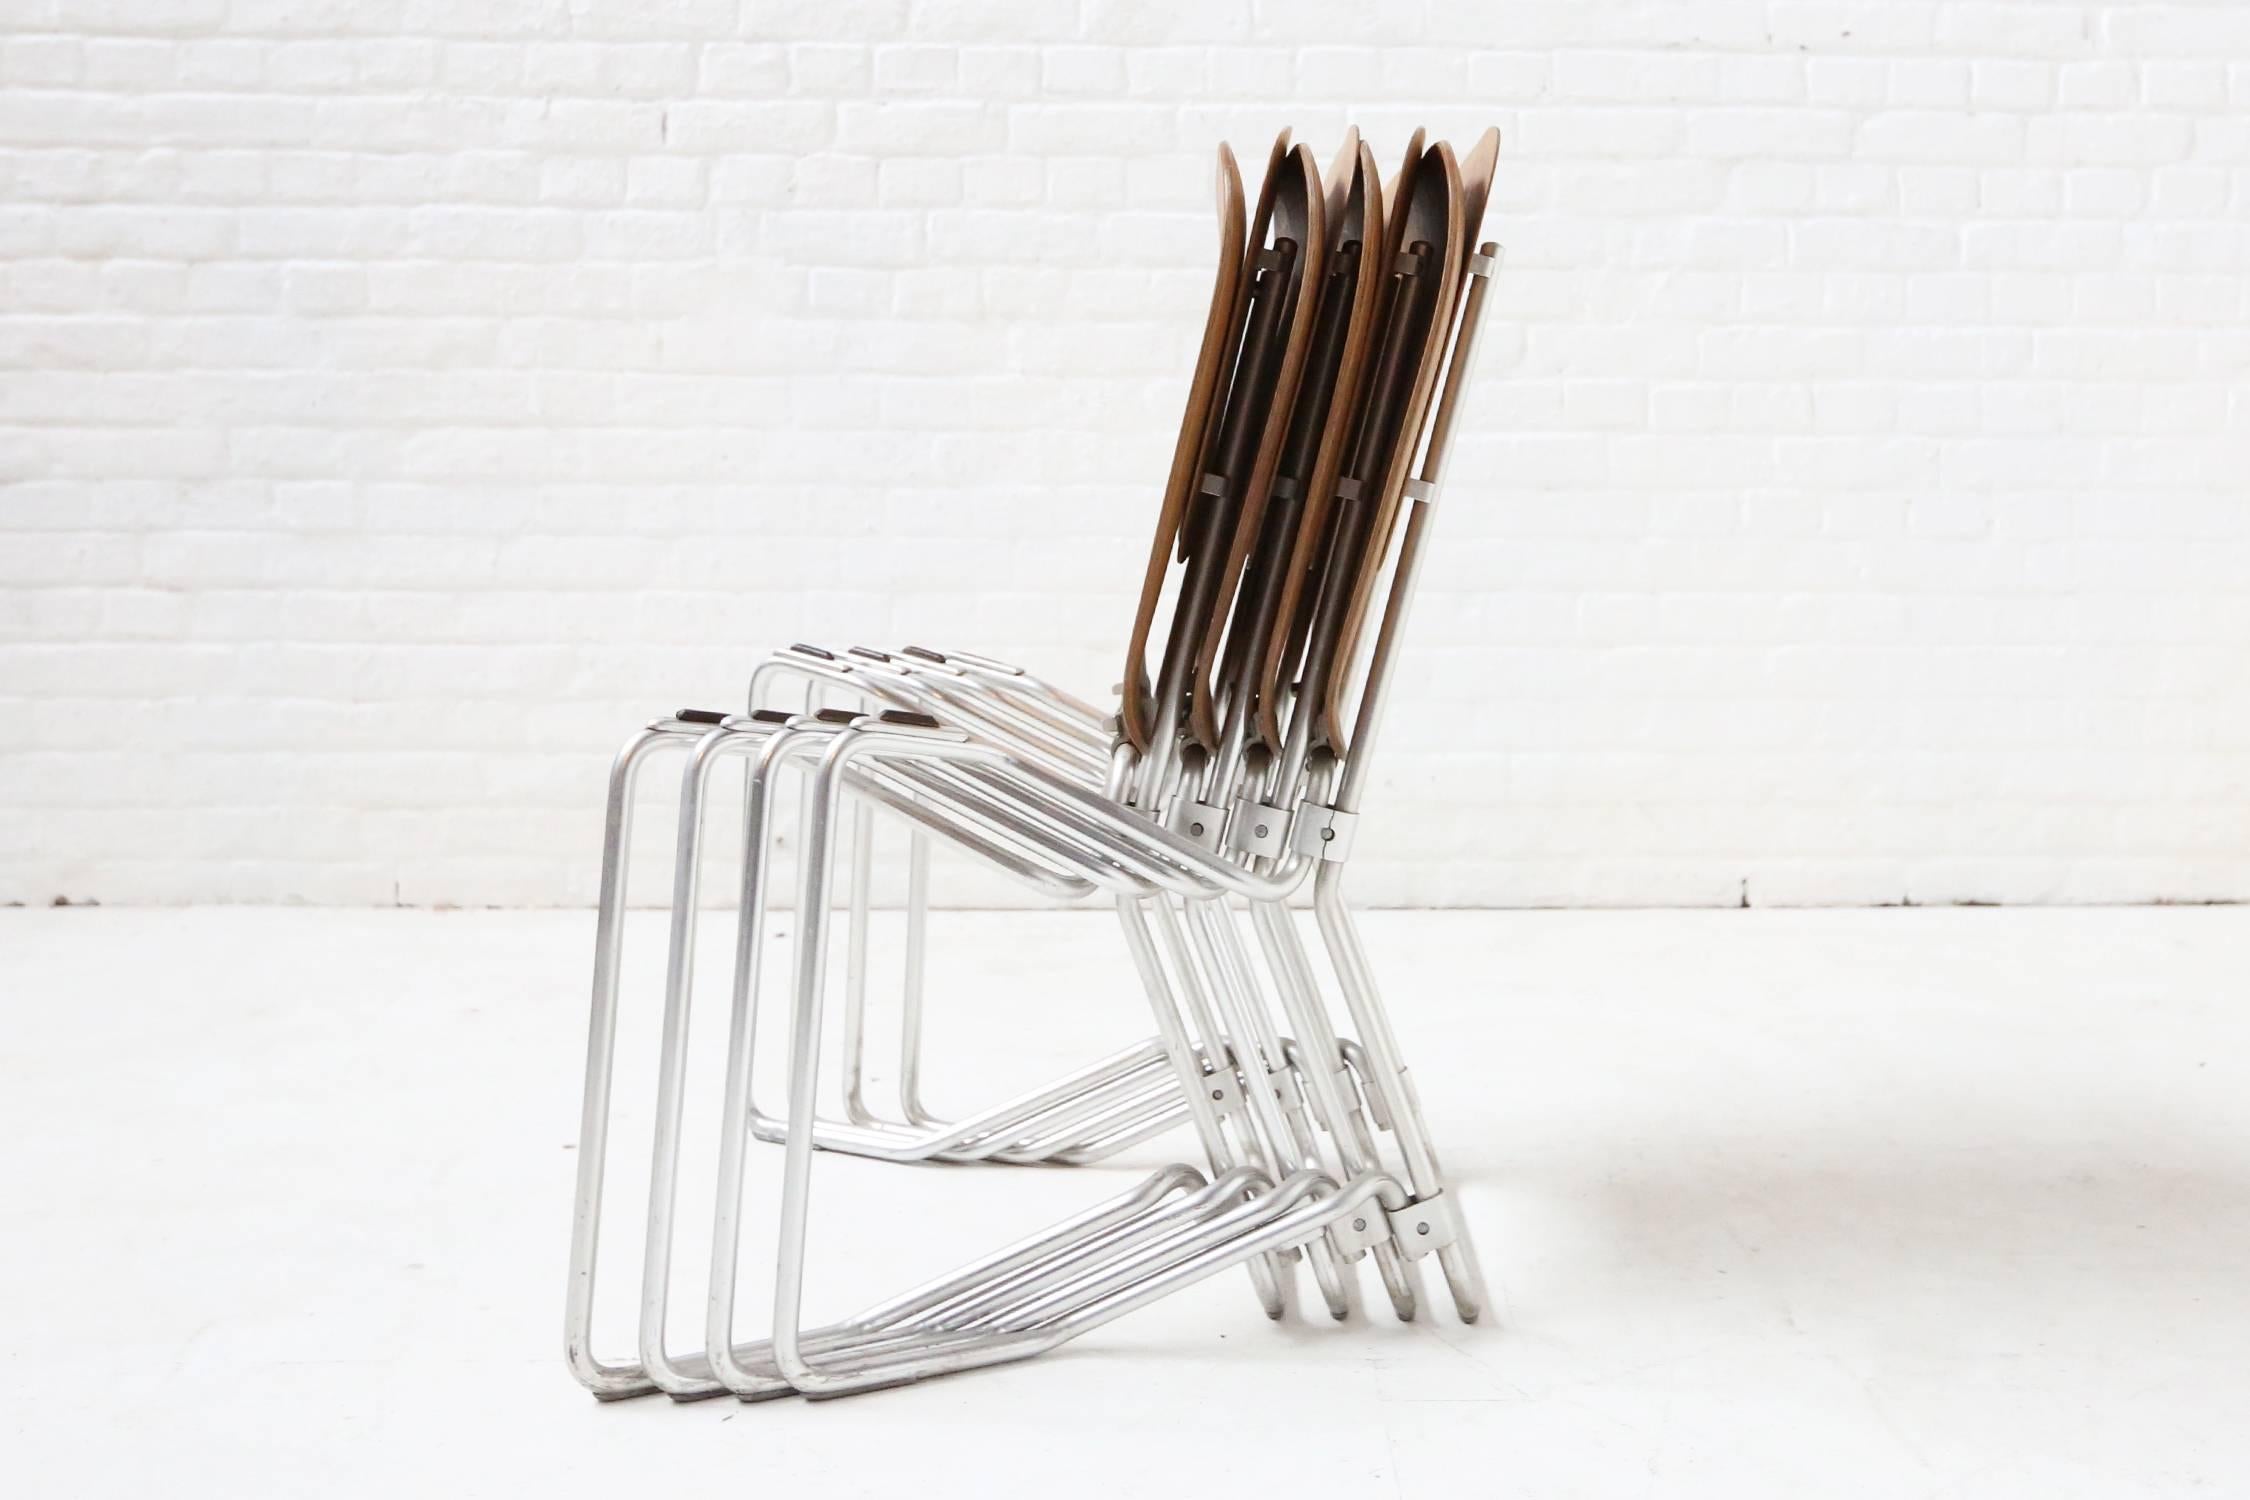 Mid-20th Century First Edition Aluflex Chairs by Armin Wirth Switzerland, 1950s For Sale